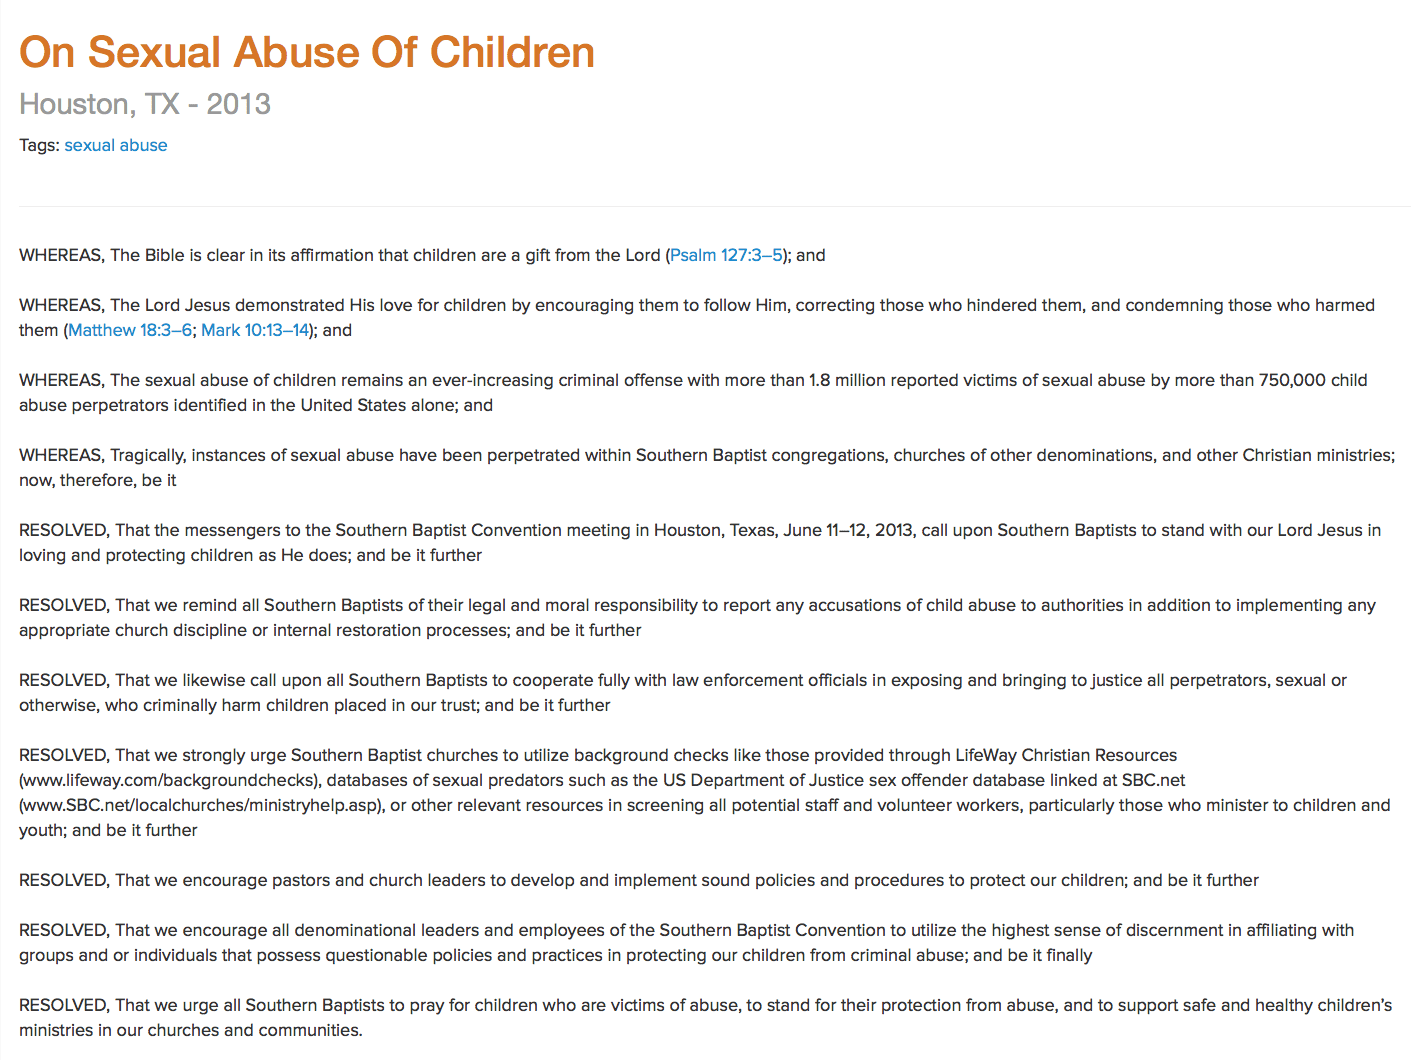 2015-09-12 Full Abuse Resolution from SBC